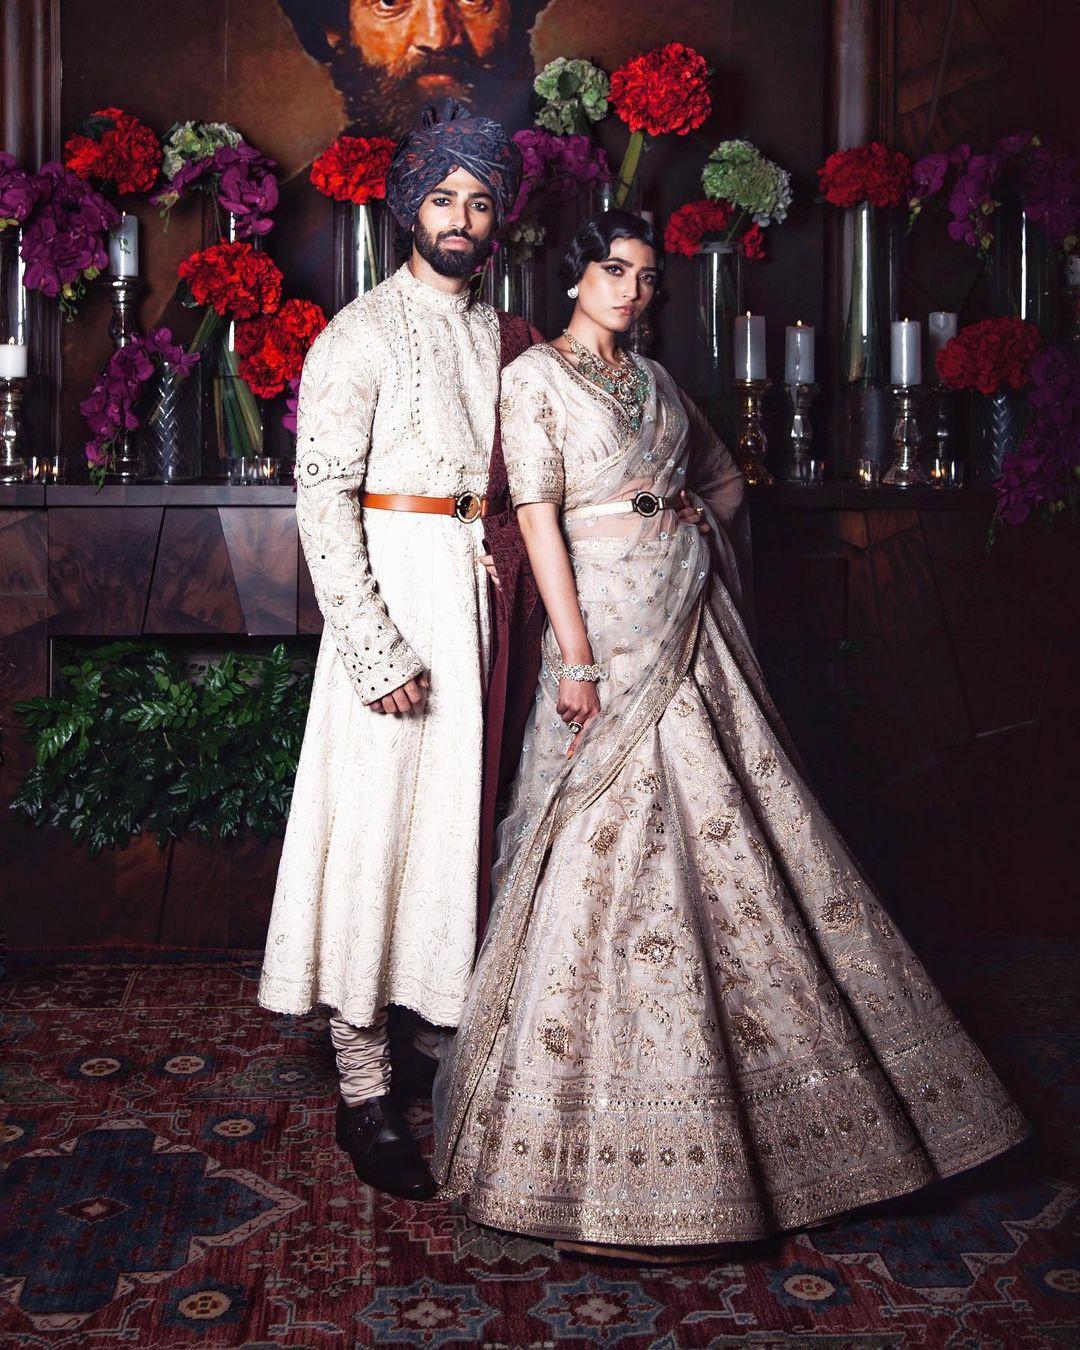 Which color suit for a groom will match a pink-orange lehenga with golden  embellishments? - Quora